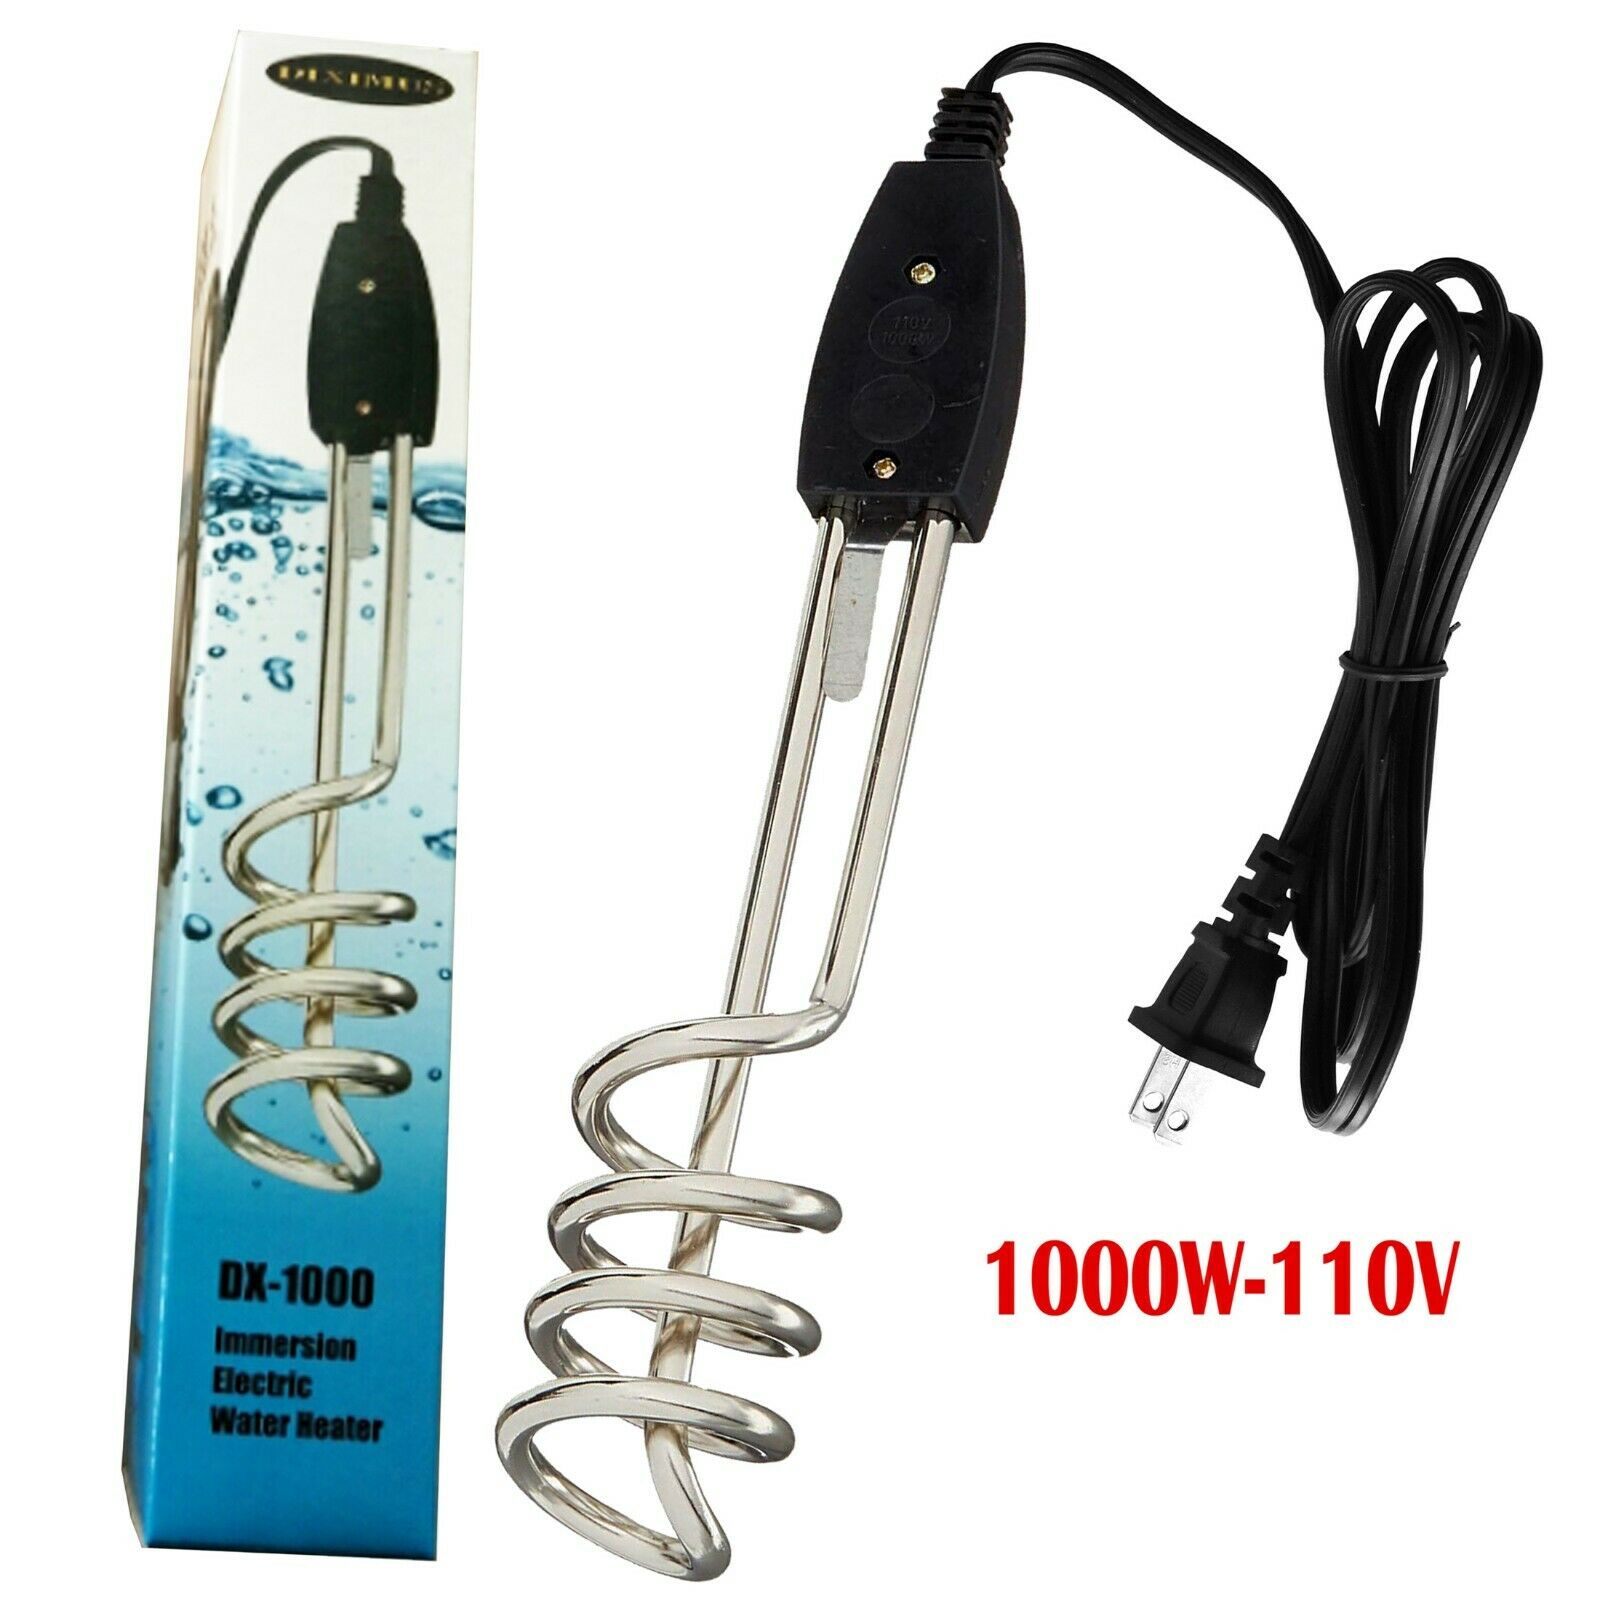 Water Heater - 10in 1000w 110v Portable Electric Immersion Water Heater - Boiler